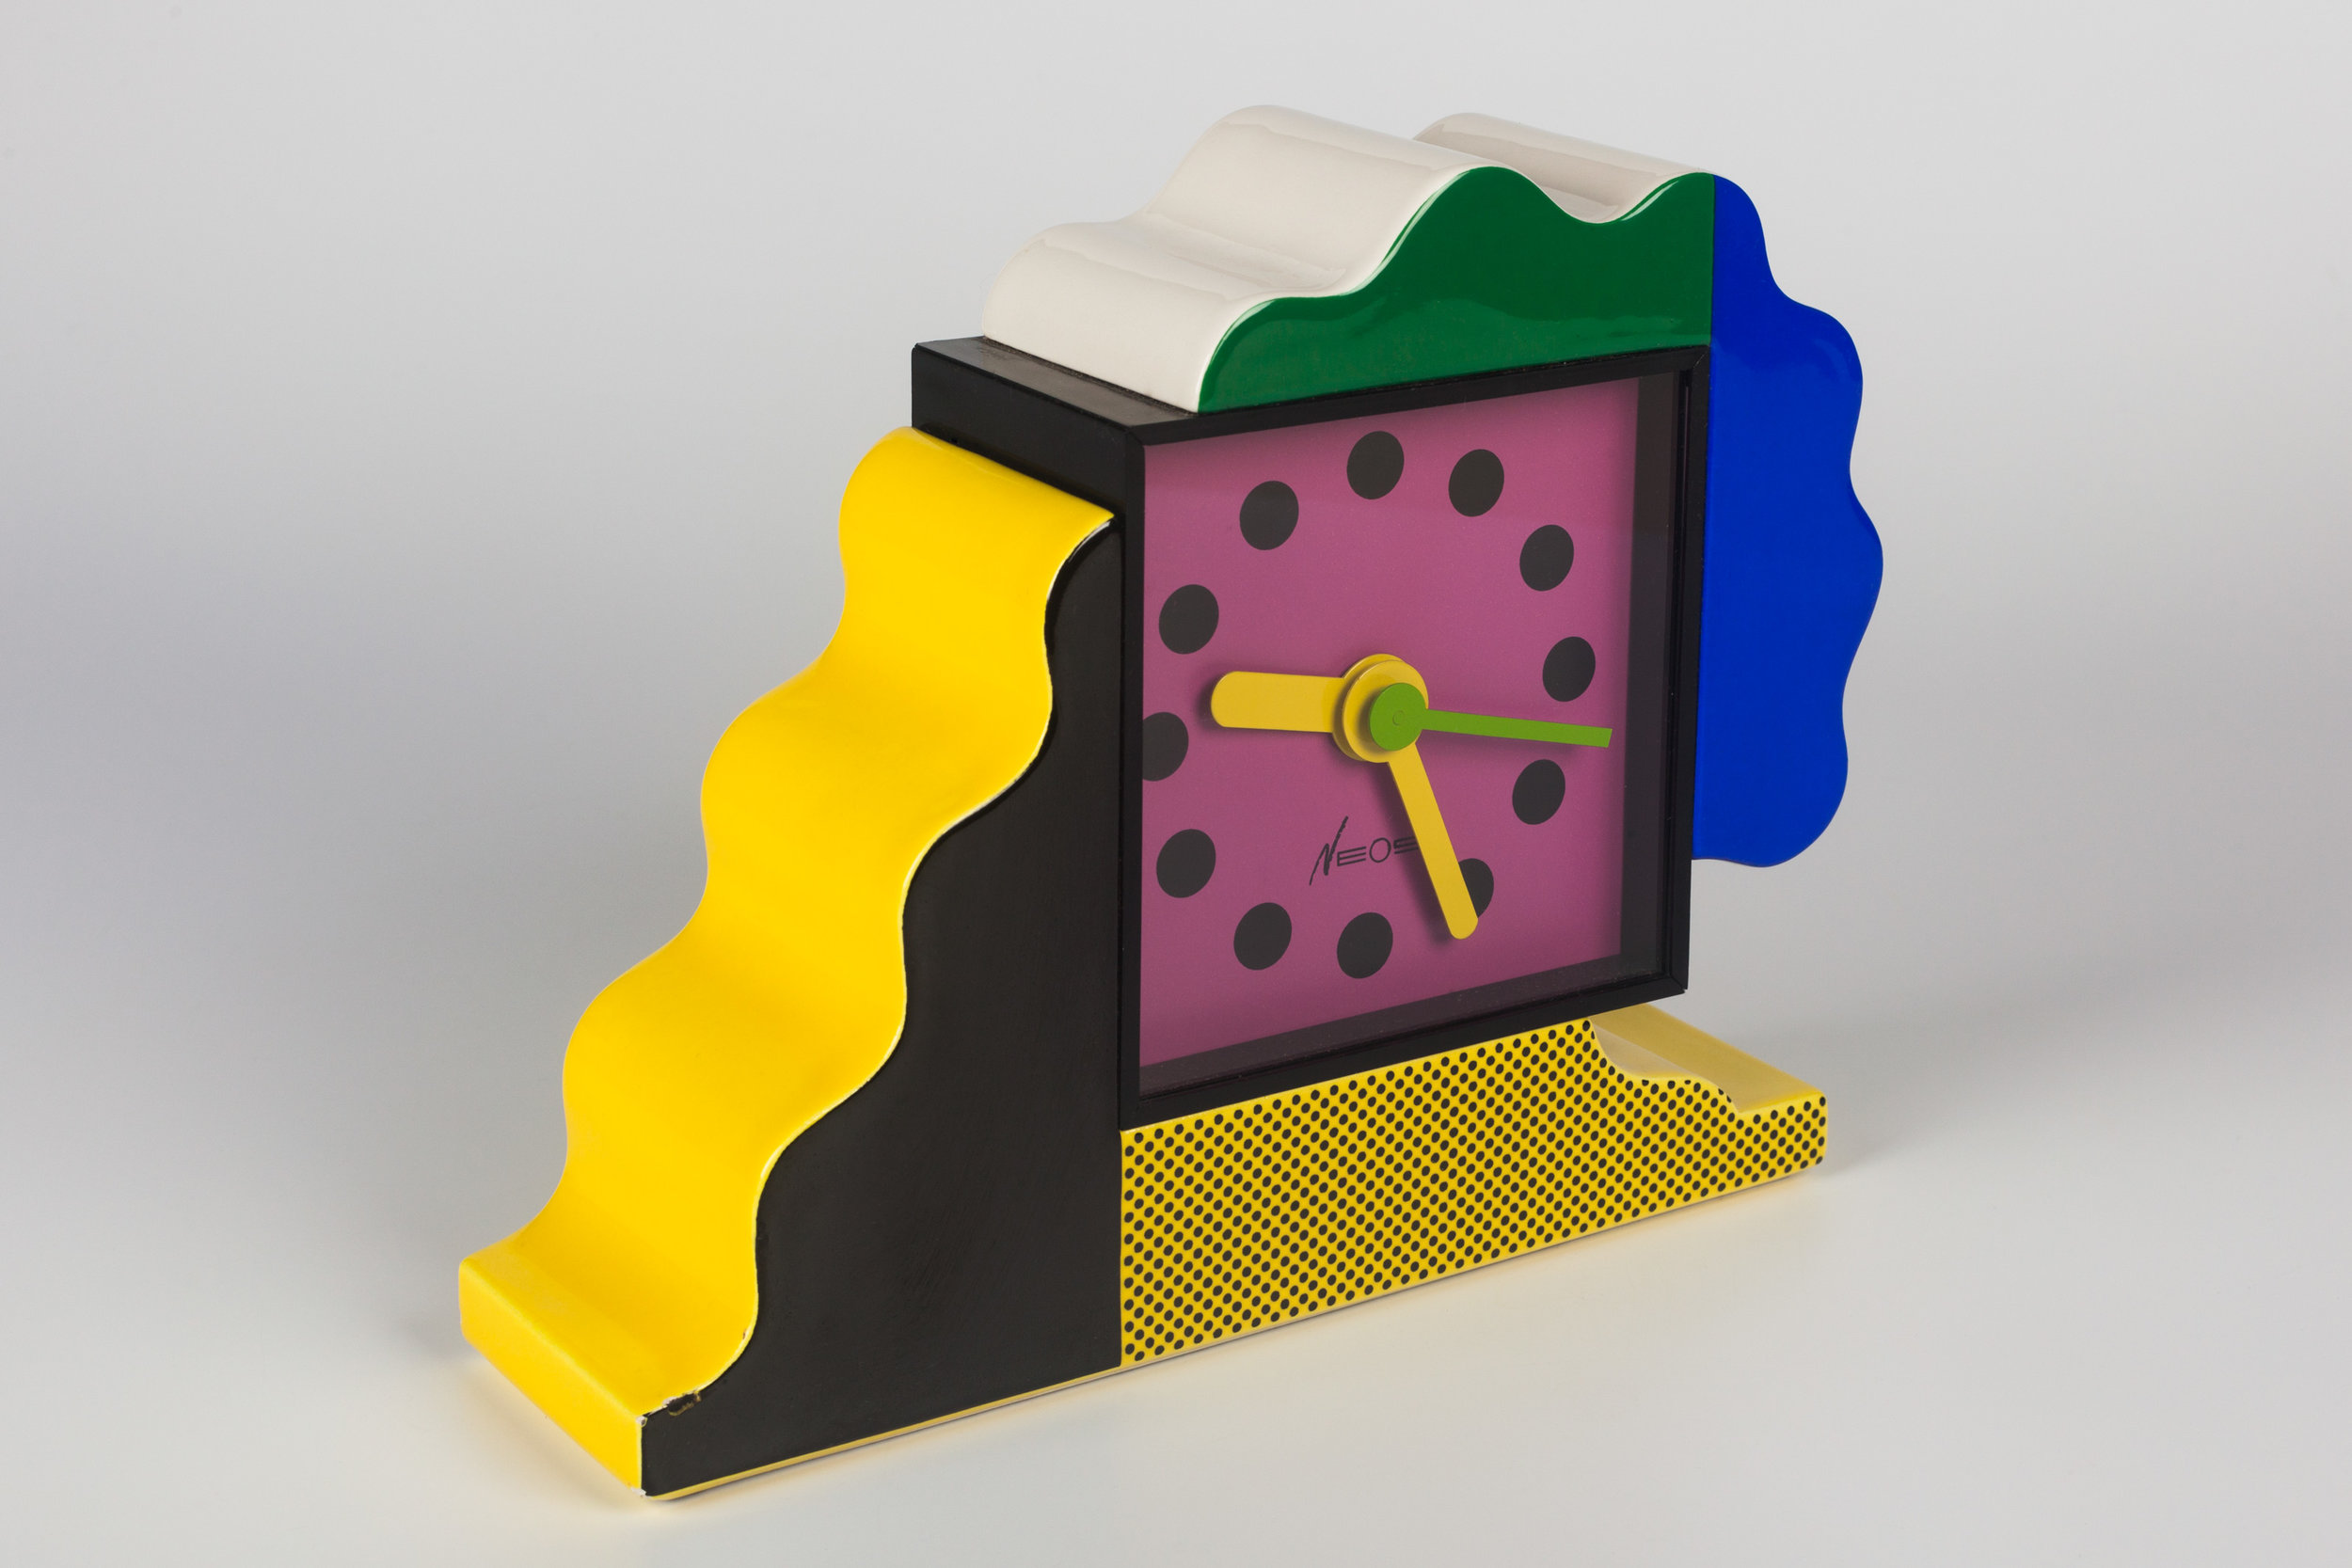 MEMPHIS CERAMIC TABLE CLOCK BY DU PASQUIER AND SOWDEN FOR NEOS, ITALY, 1980S